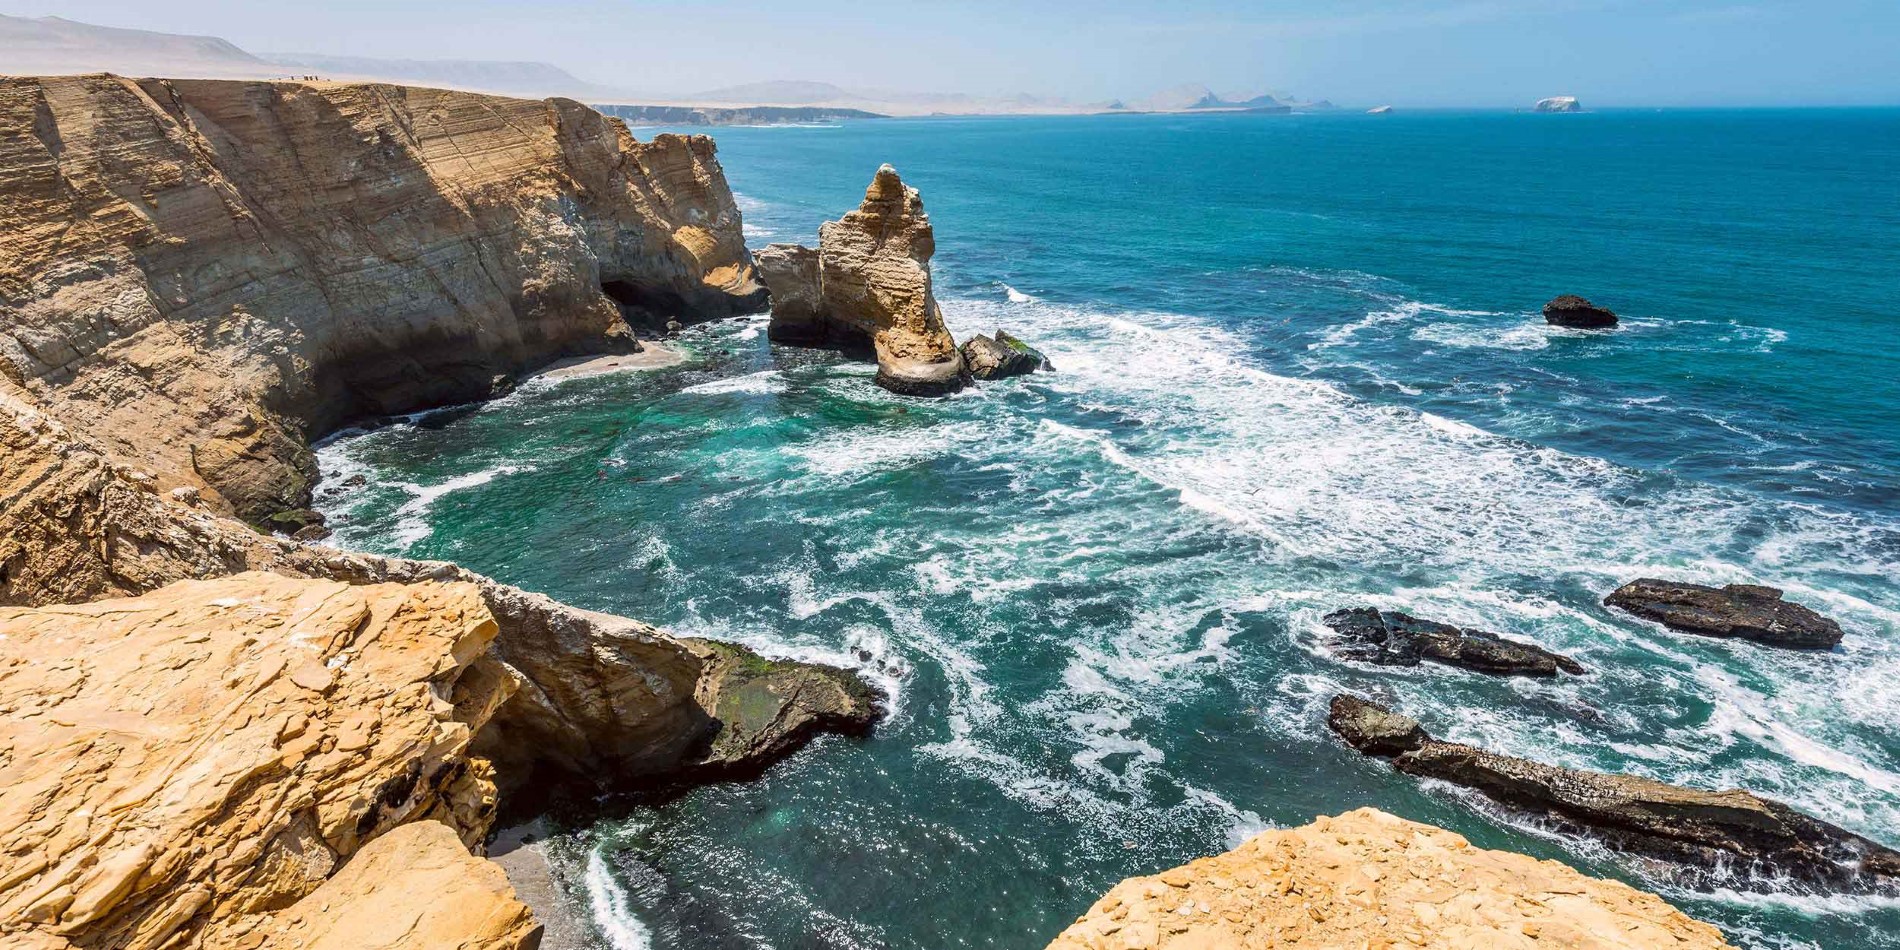 Supay Beach and its rock formations in the Paracas National Reserve